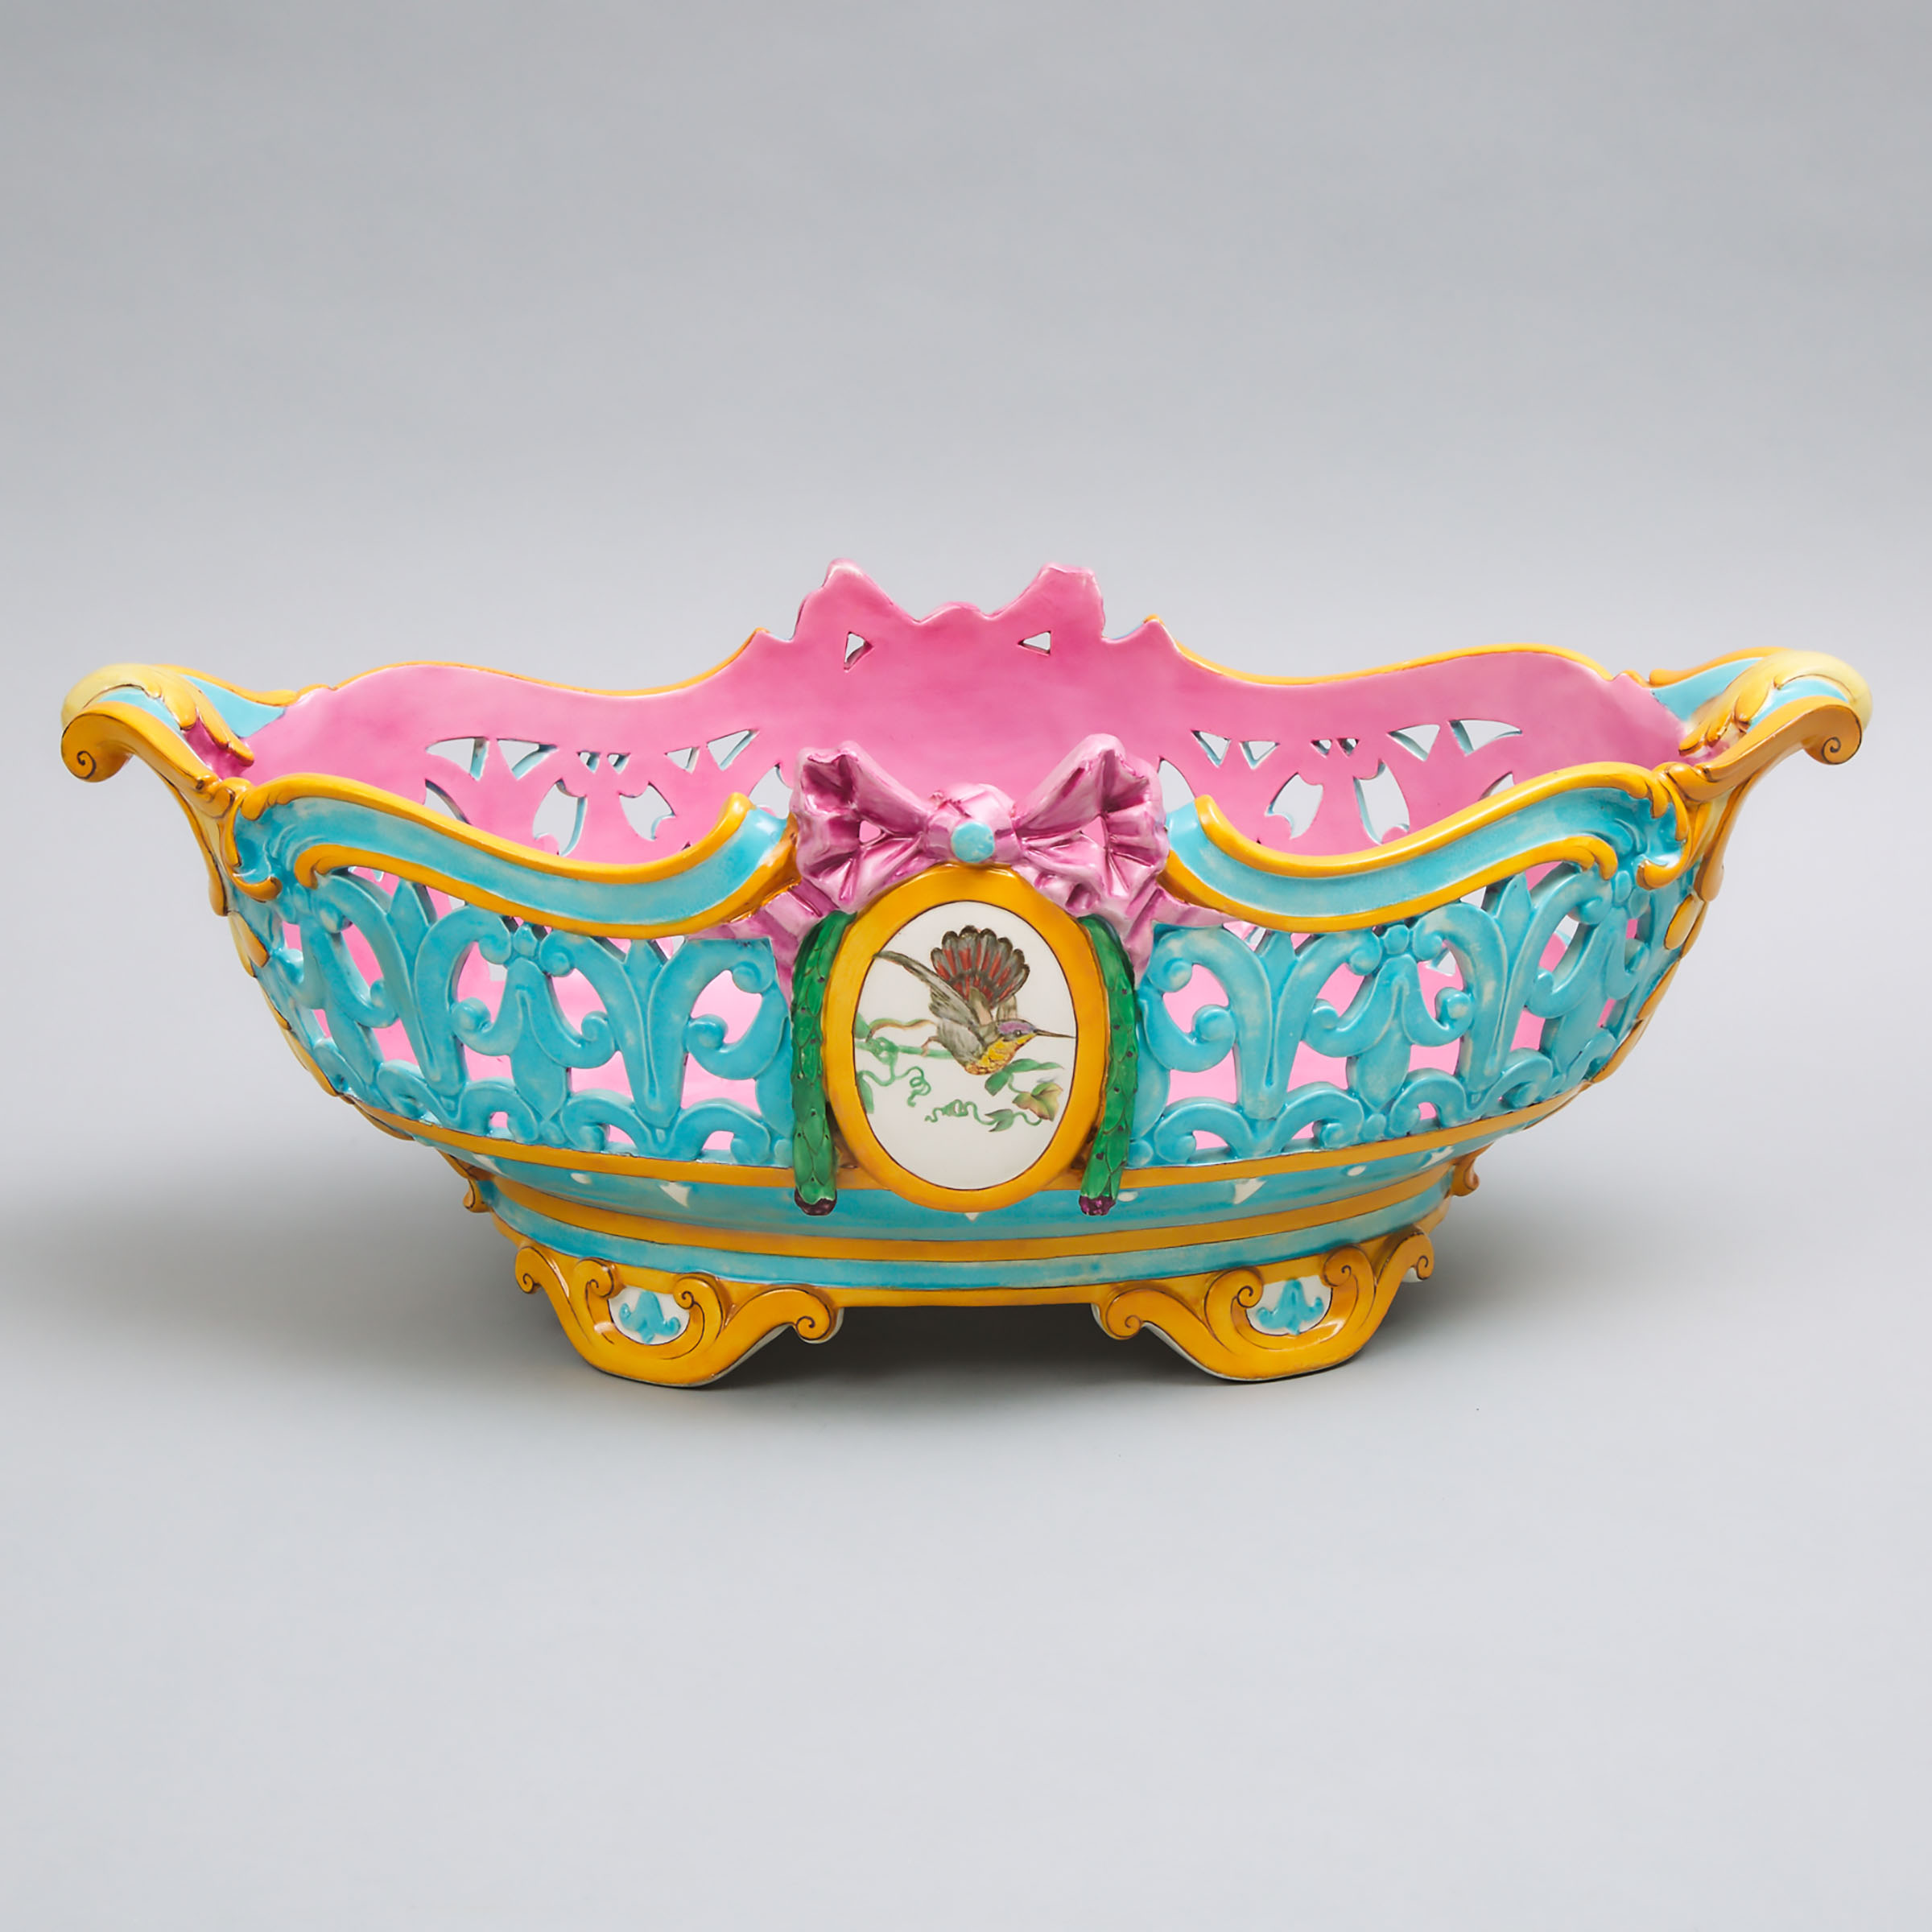 Wedgwood Reticulated Majolica Oval Centrepiece, 1872